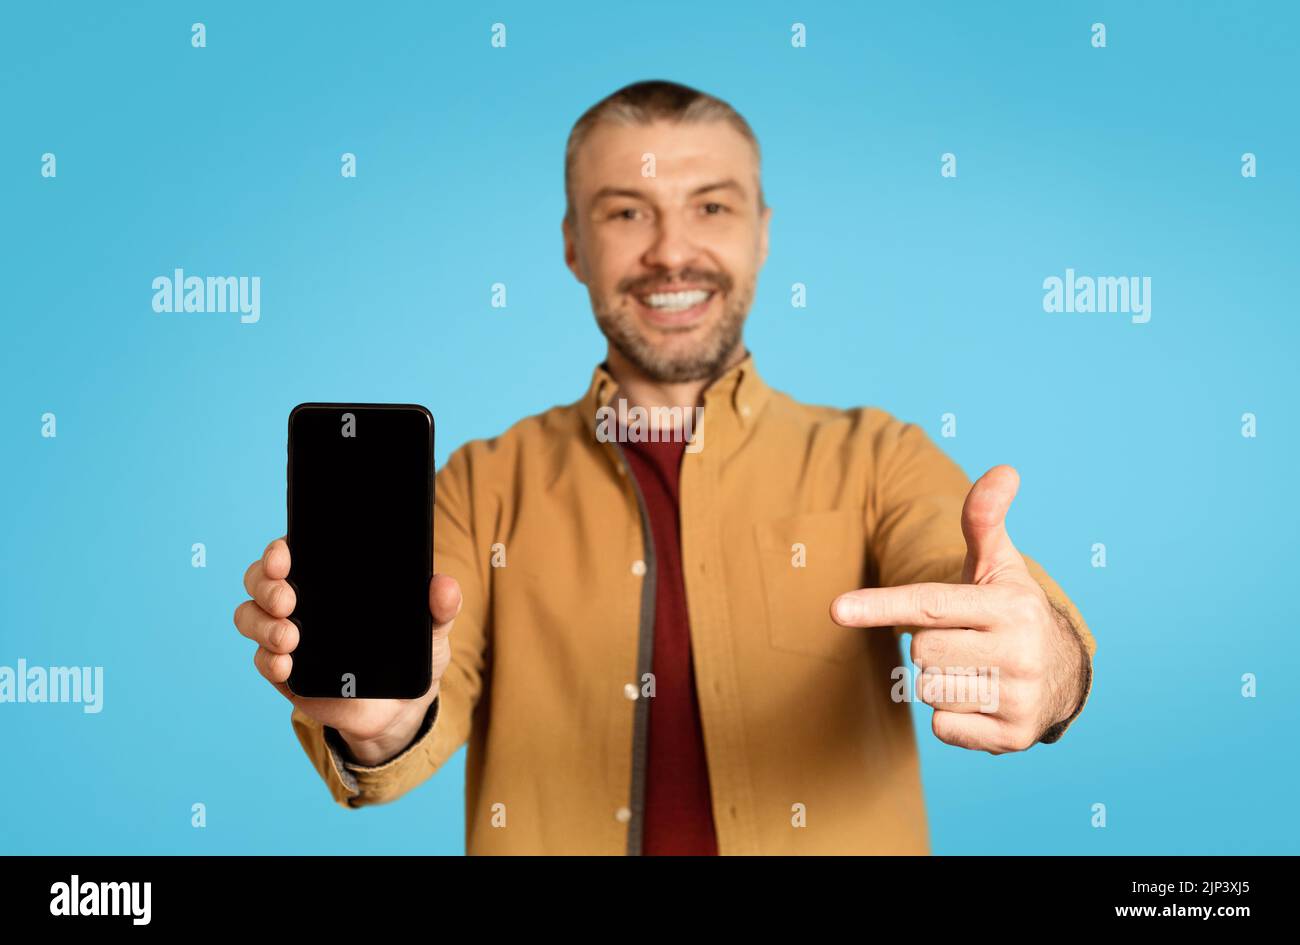 Happy Middle Aged Male Showing Smartphone Screen Over Blue Background Stock Photo